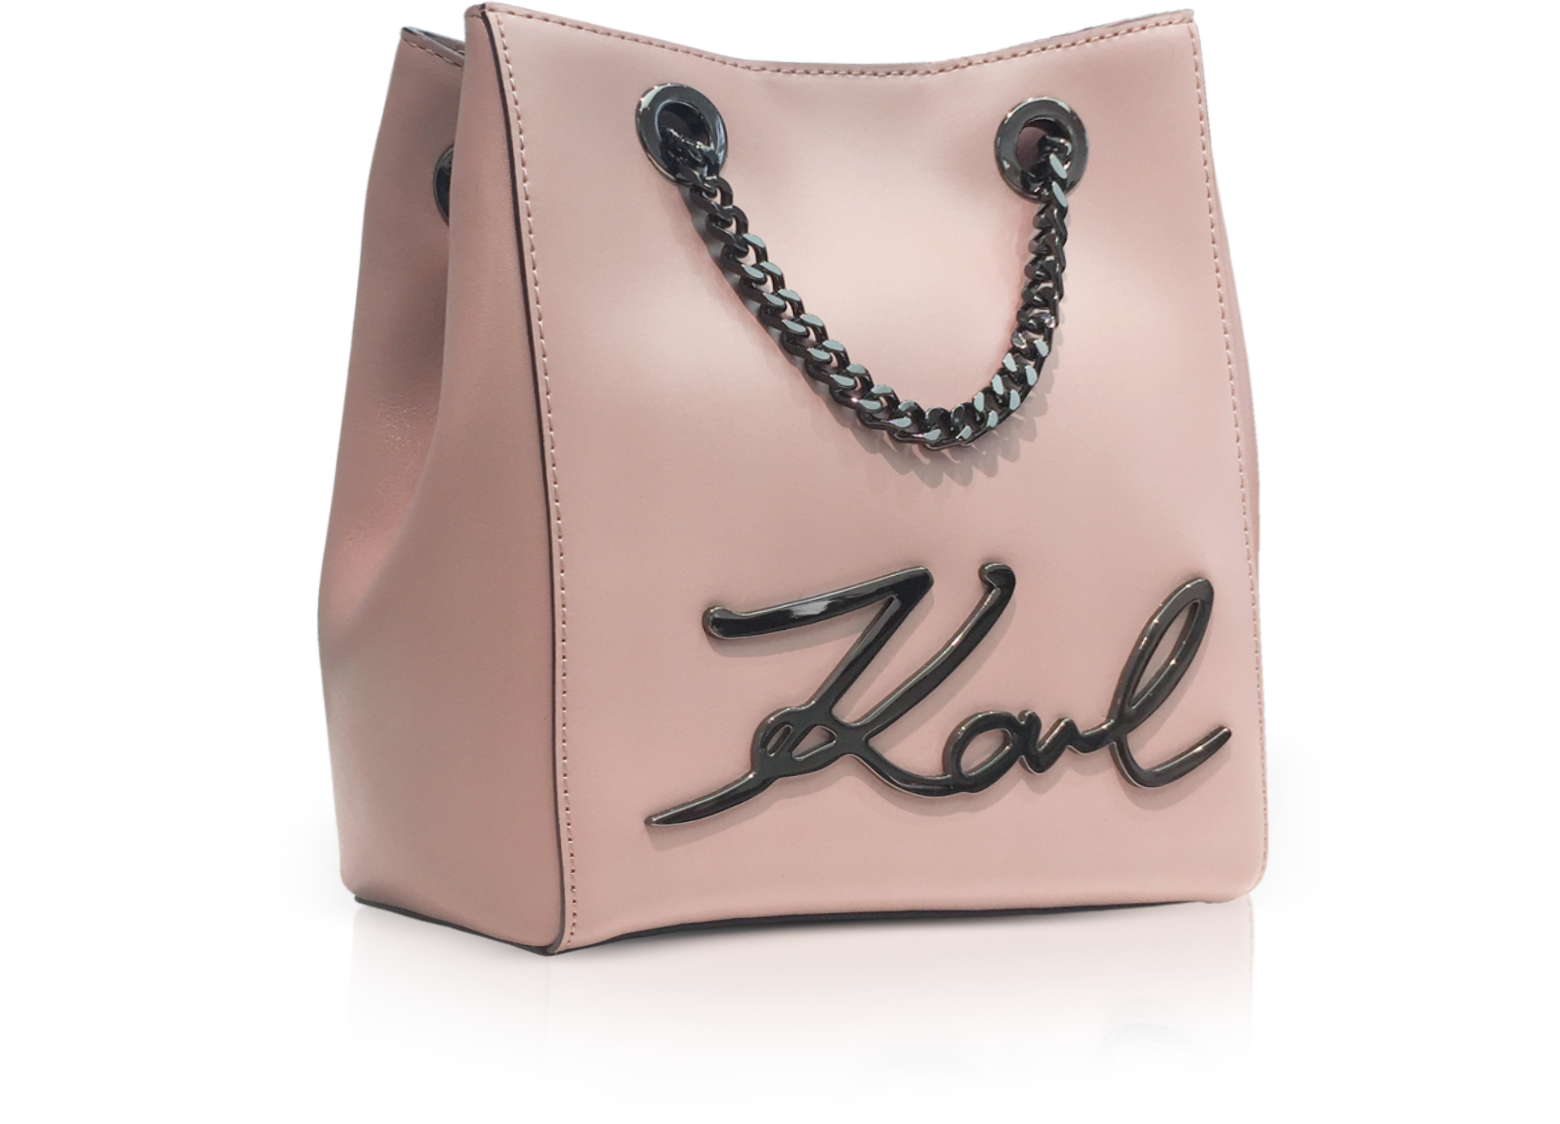 Karl Lagerfeld K/Autograph Minaudiere Whip Clutch Bag in Gre